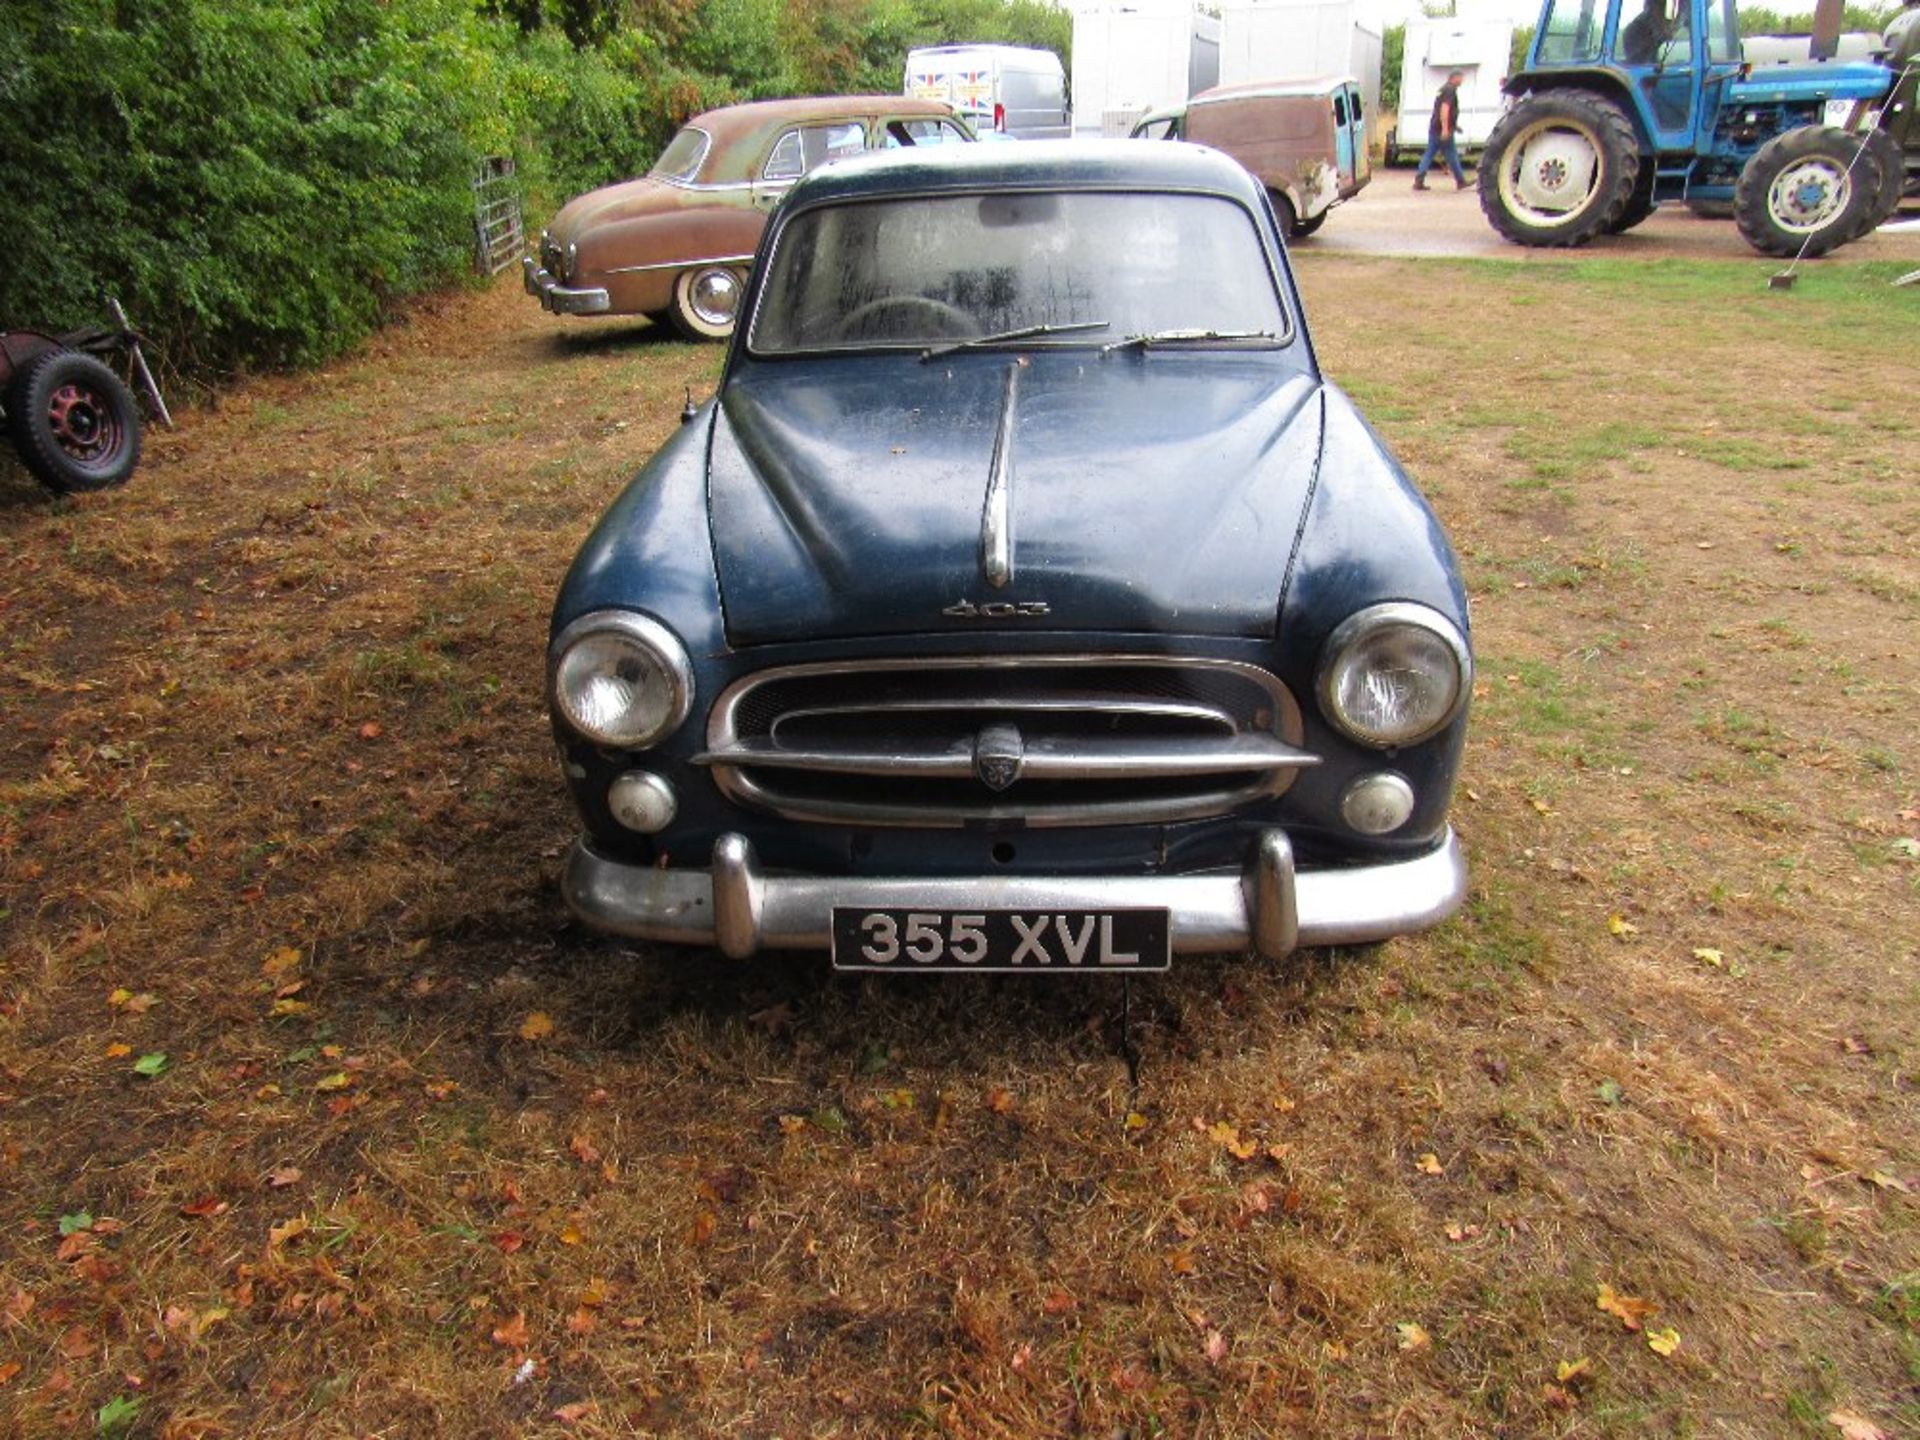 1961 Peugeot 403, reg: 355 XVL, runs and drives, serial number: 2462584, 58,256 miles on clock, - Image 4 of 7